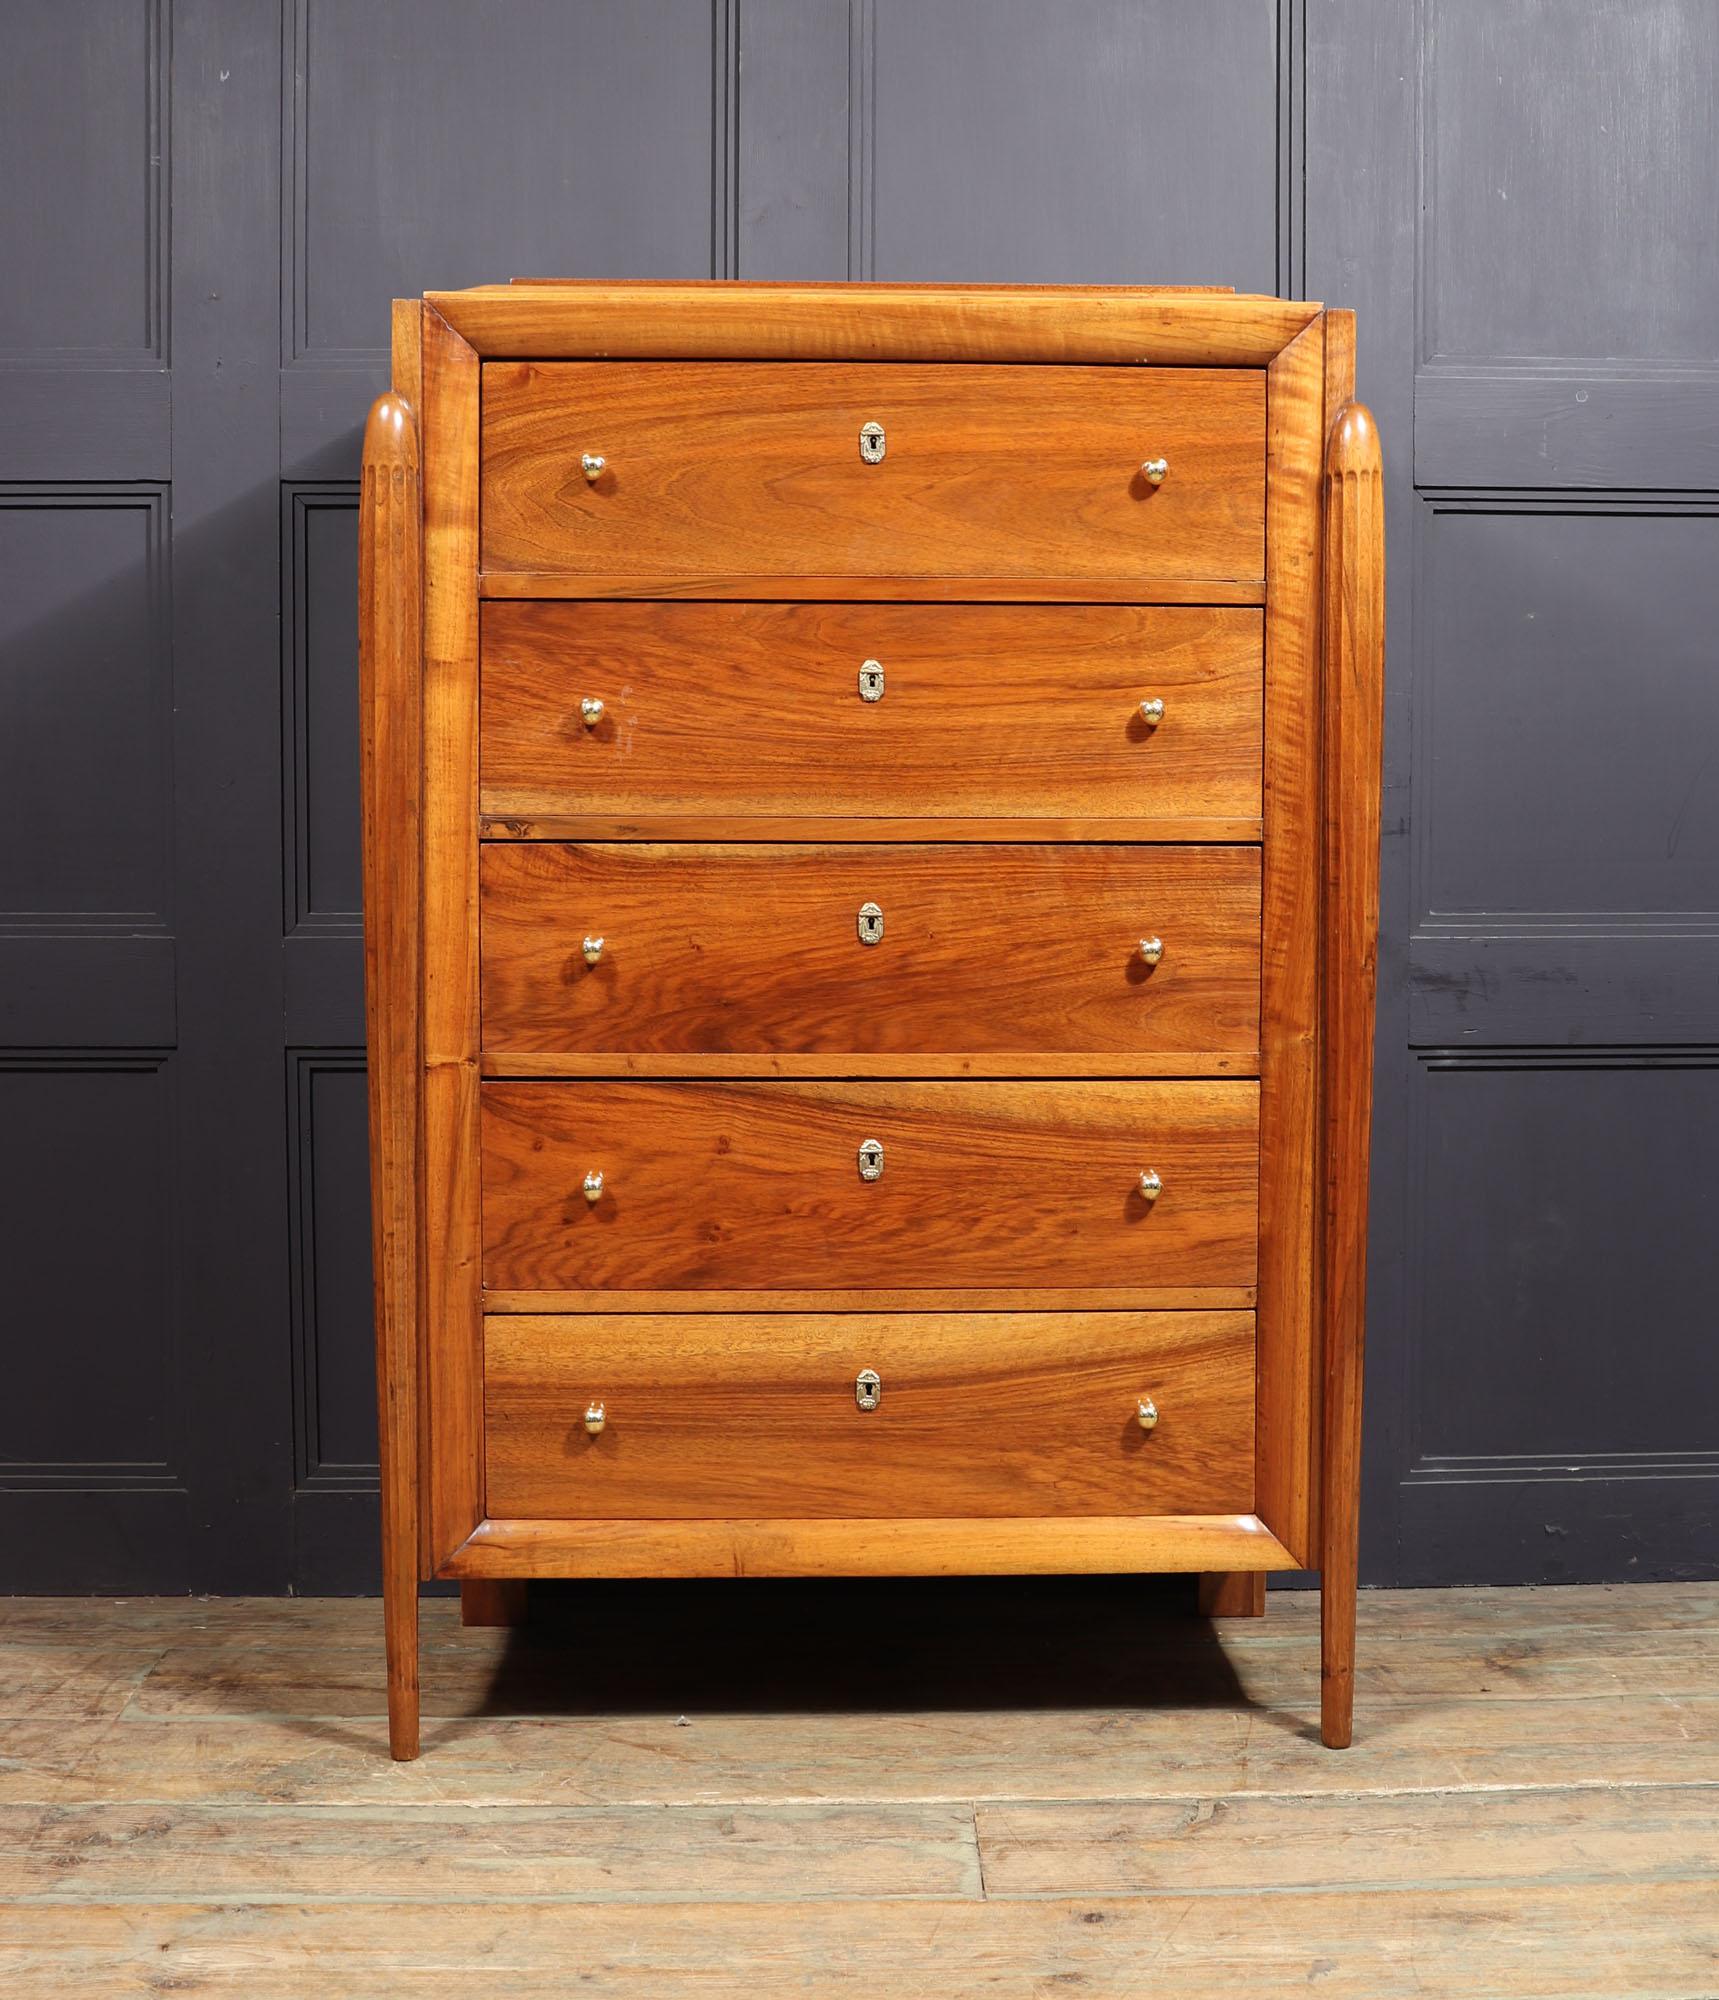 ART DECO WALNUT CHEST OF DRAWERS
An exceptional style and quality French Art Deco chest of drawers produced in France in the 1920’s having five long drawers with brass ball handles and escutcheons tapered turned fluted legs and shaped rising top all